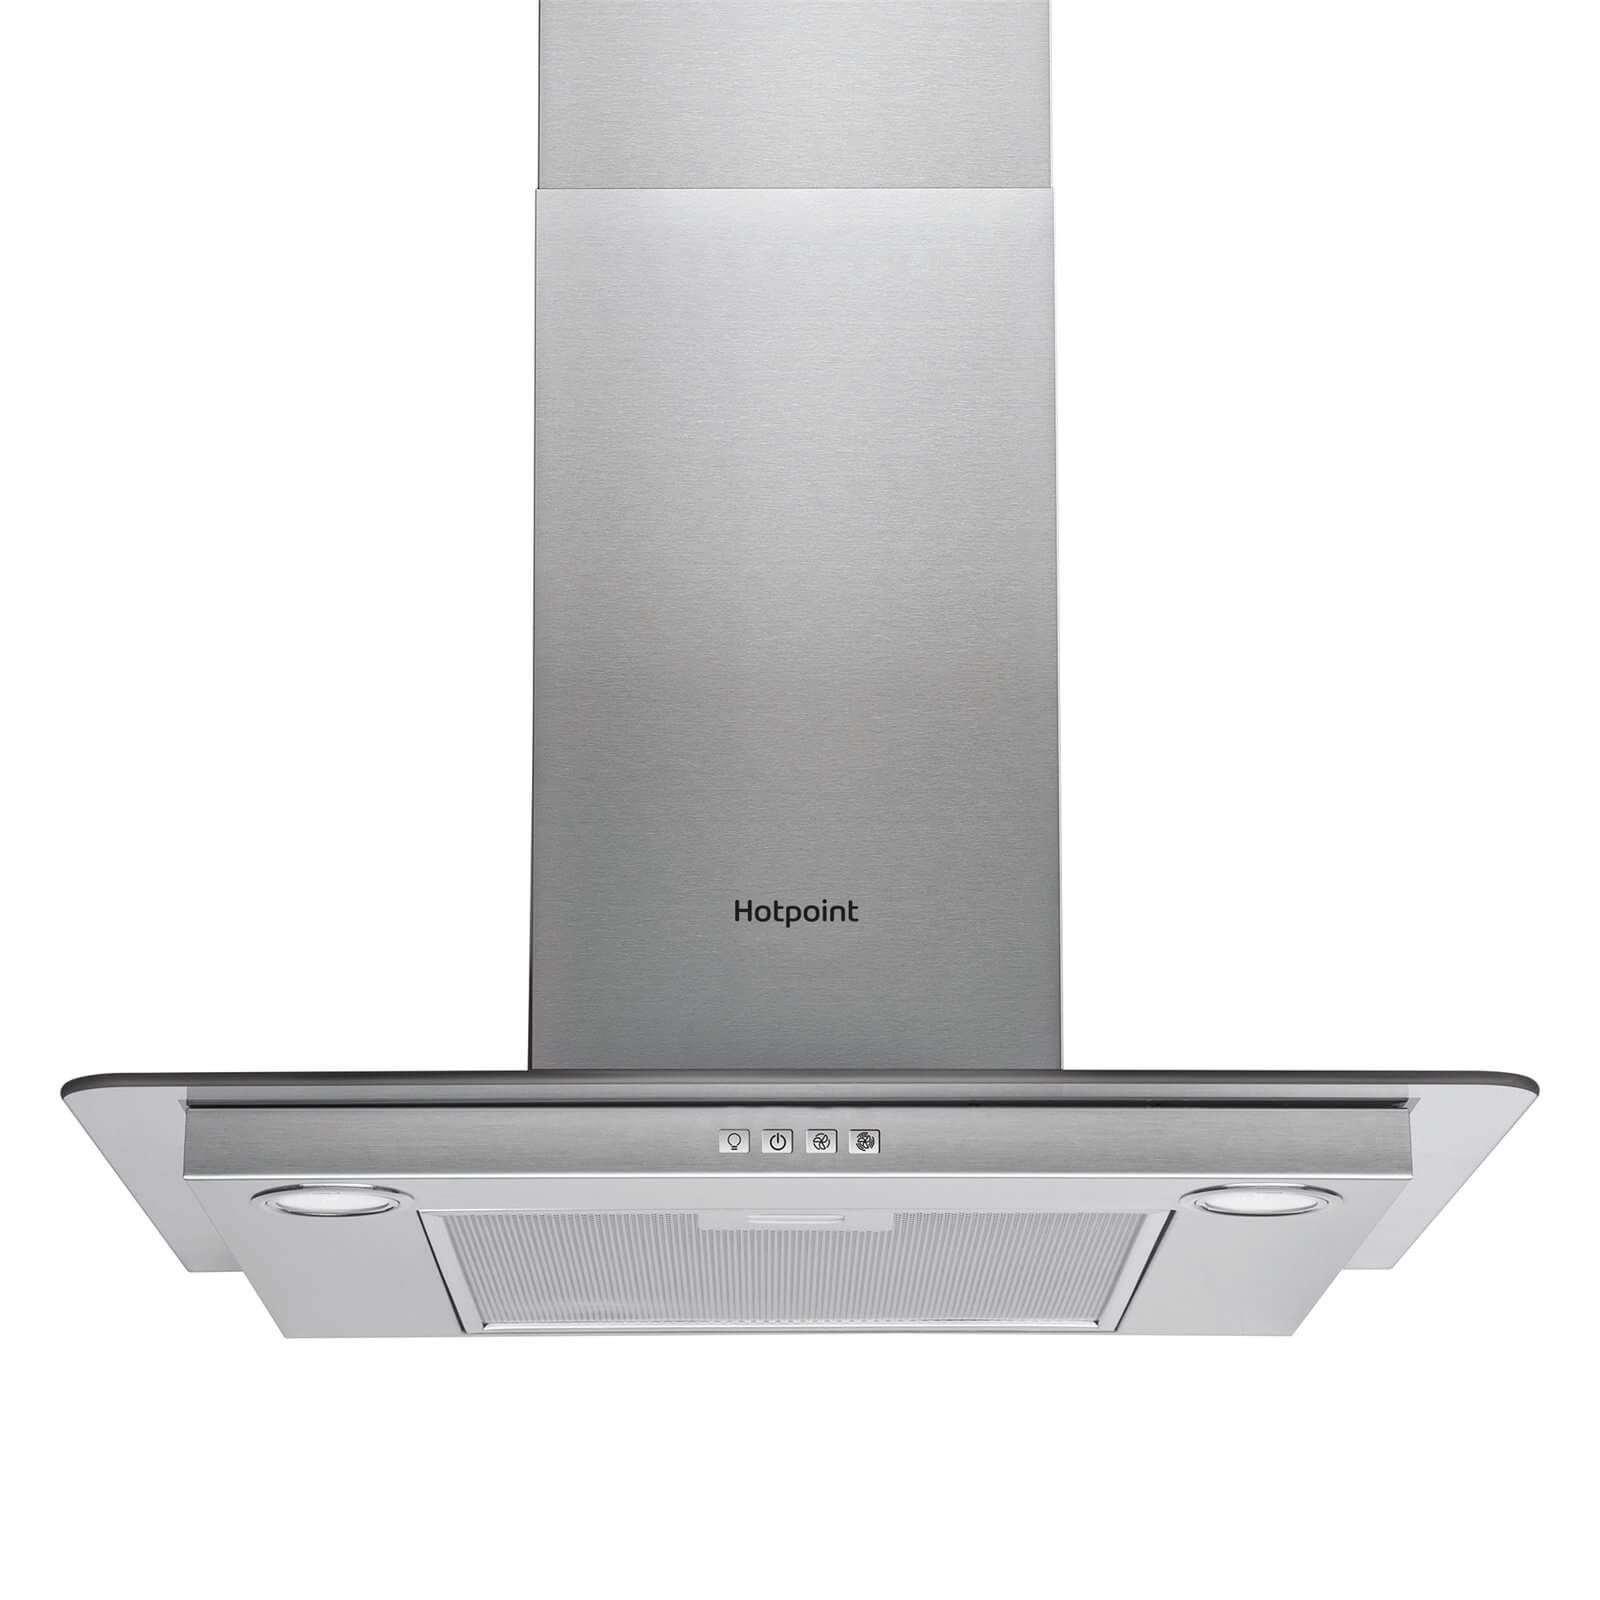 Hotpoint PHFG6.5FABX Flat Chimney Cooker Hood - 60cm - Stainless Steel